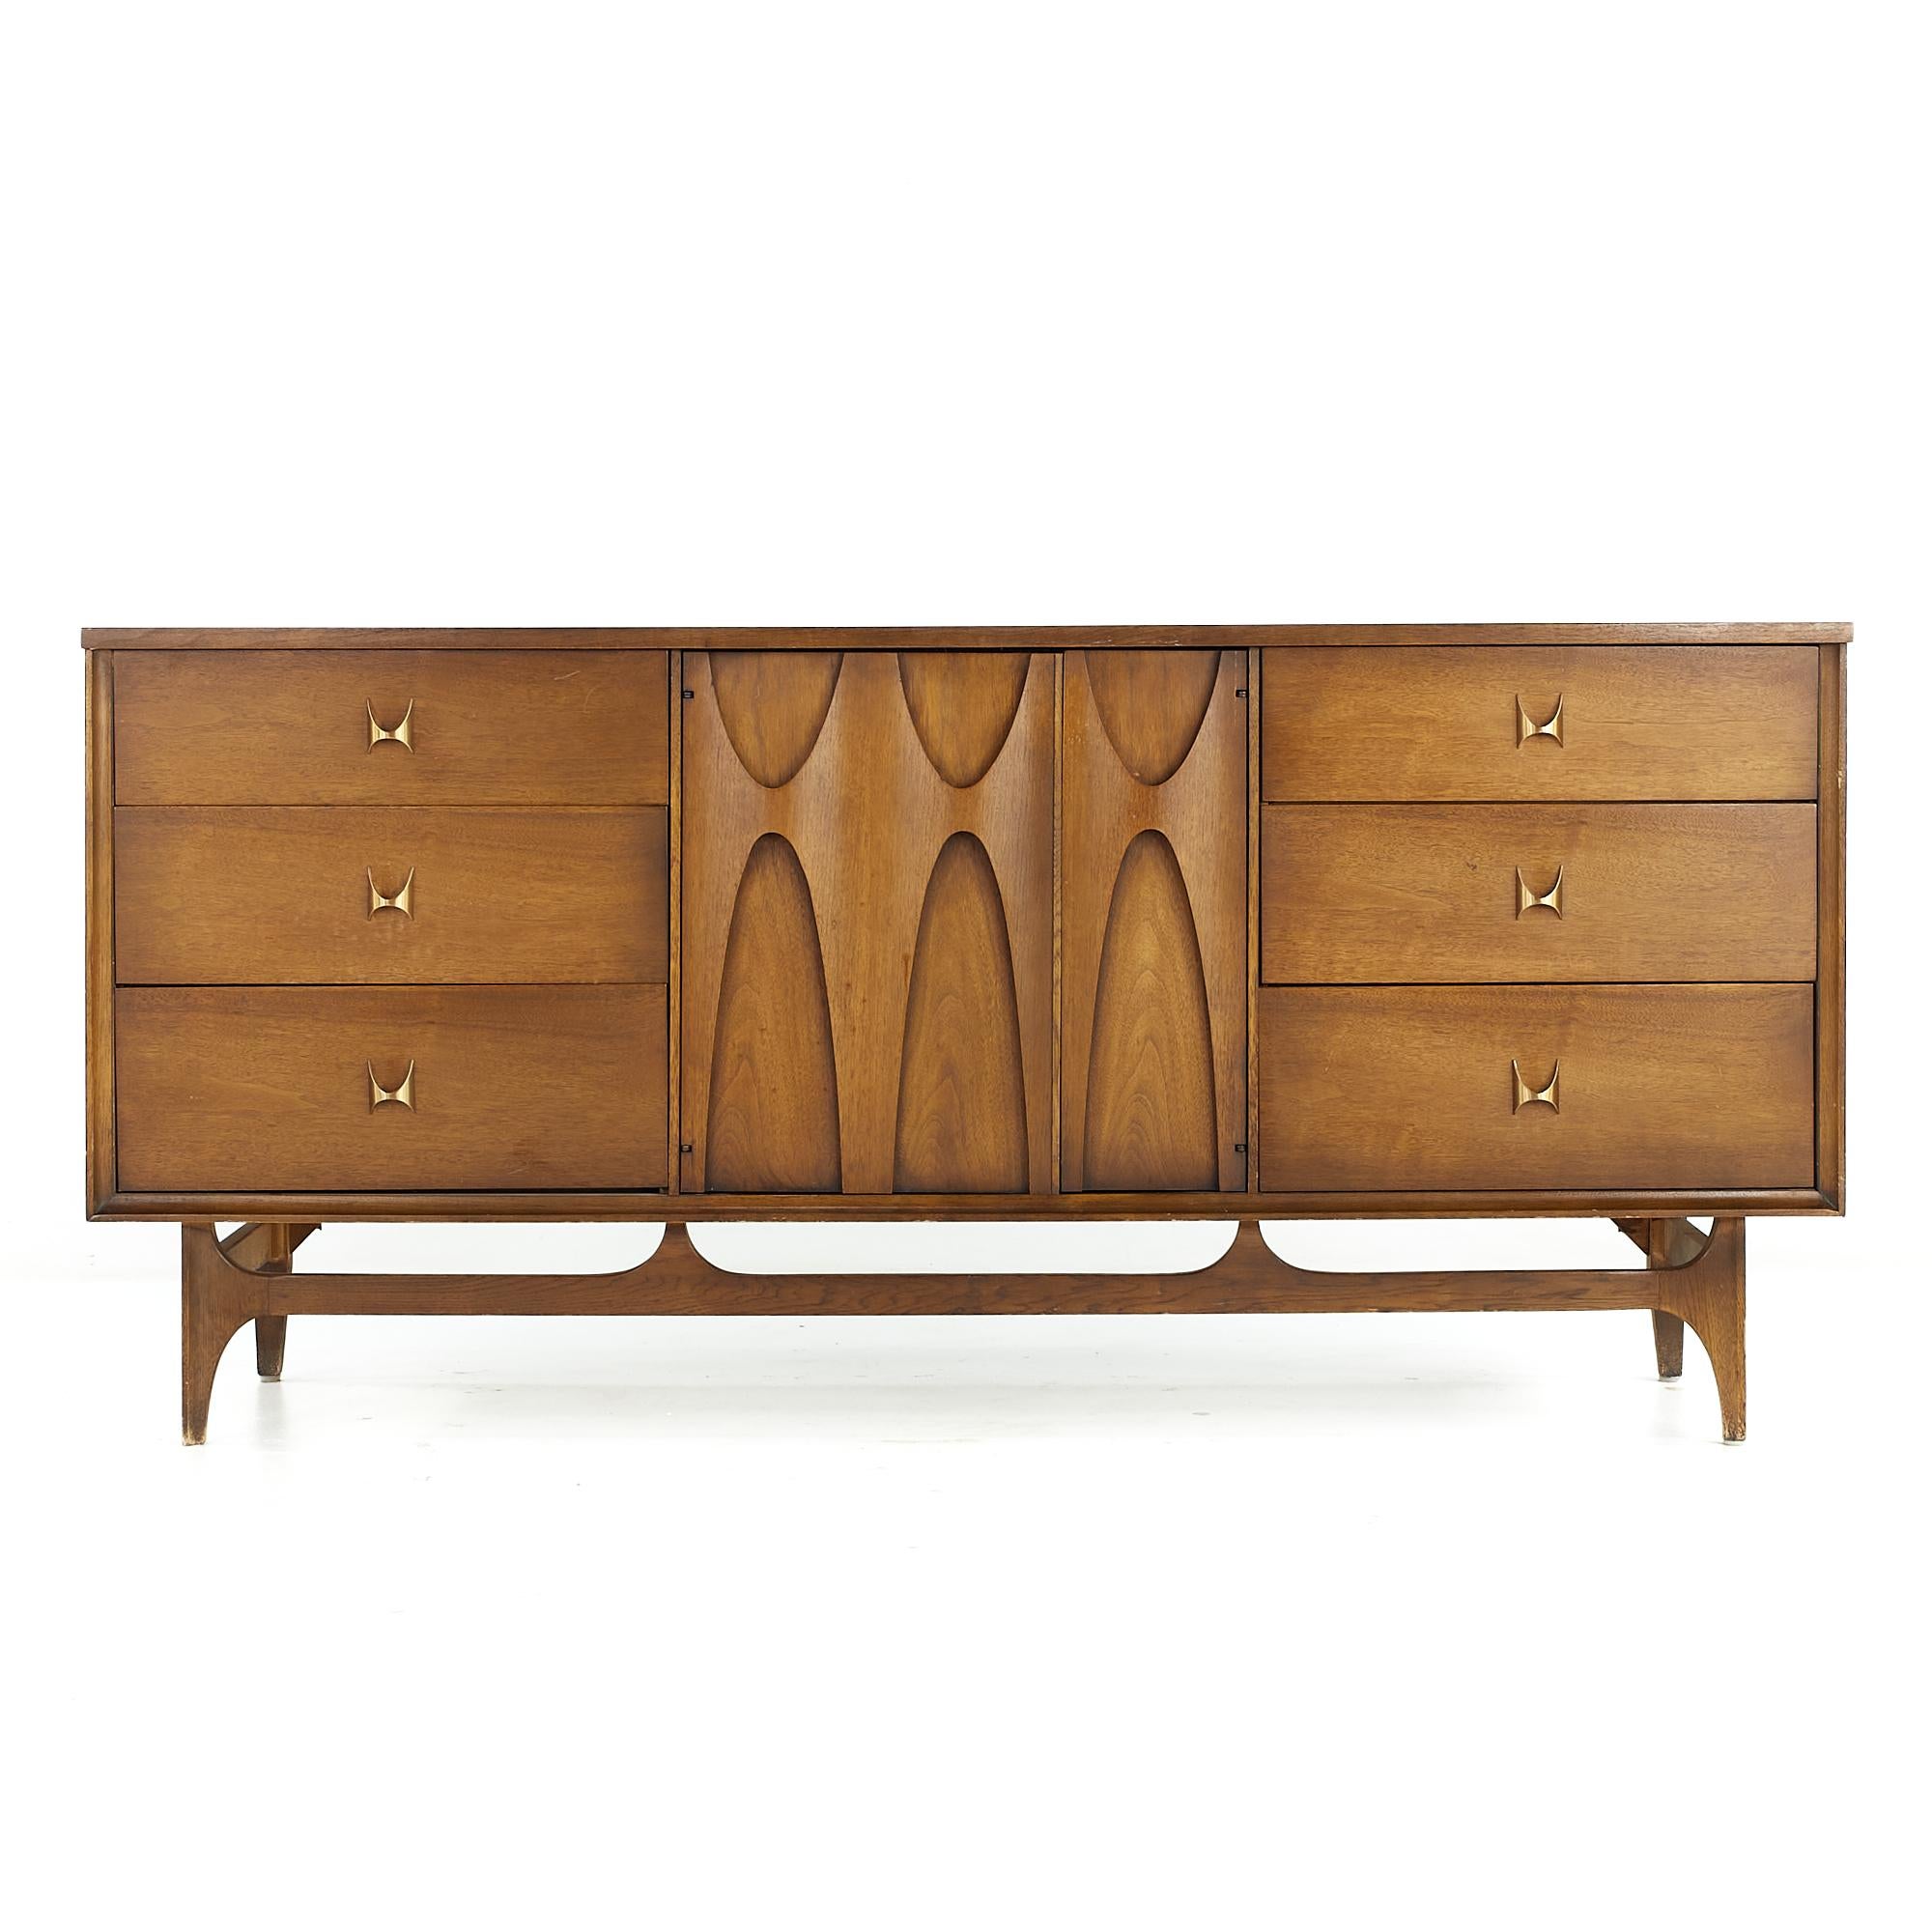 Broyhill Brasilia midcentury Walnut and Brass 9 Drawer Lowboy Dresser

This lowboy measures: 66 wide x 19 deep x 31 inches high

All pieces of furniture can be had in what we call restored vintage condition. That means the piece is restored upon